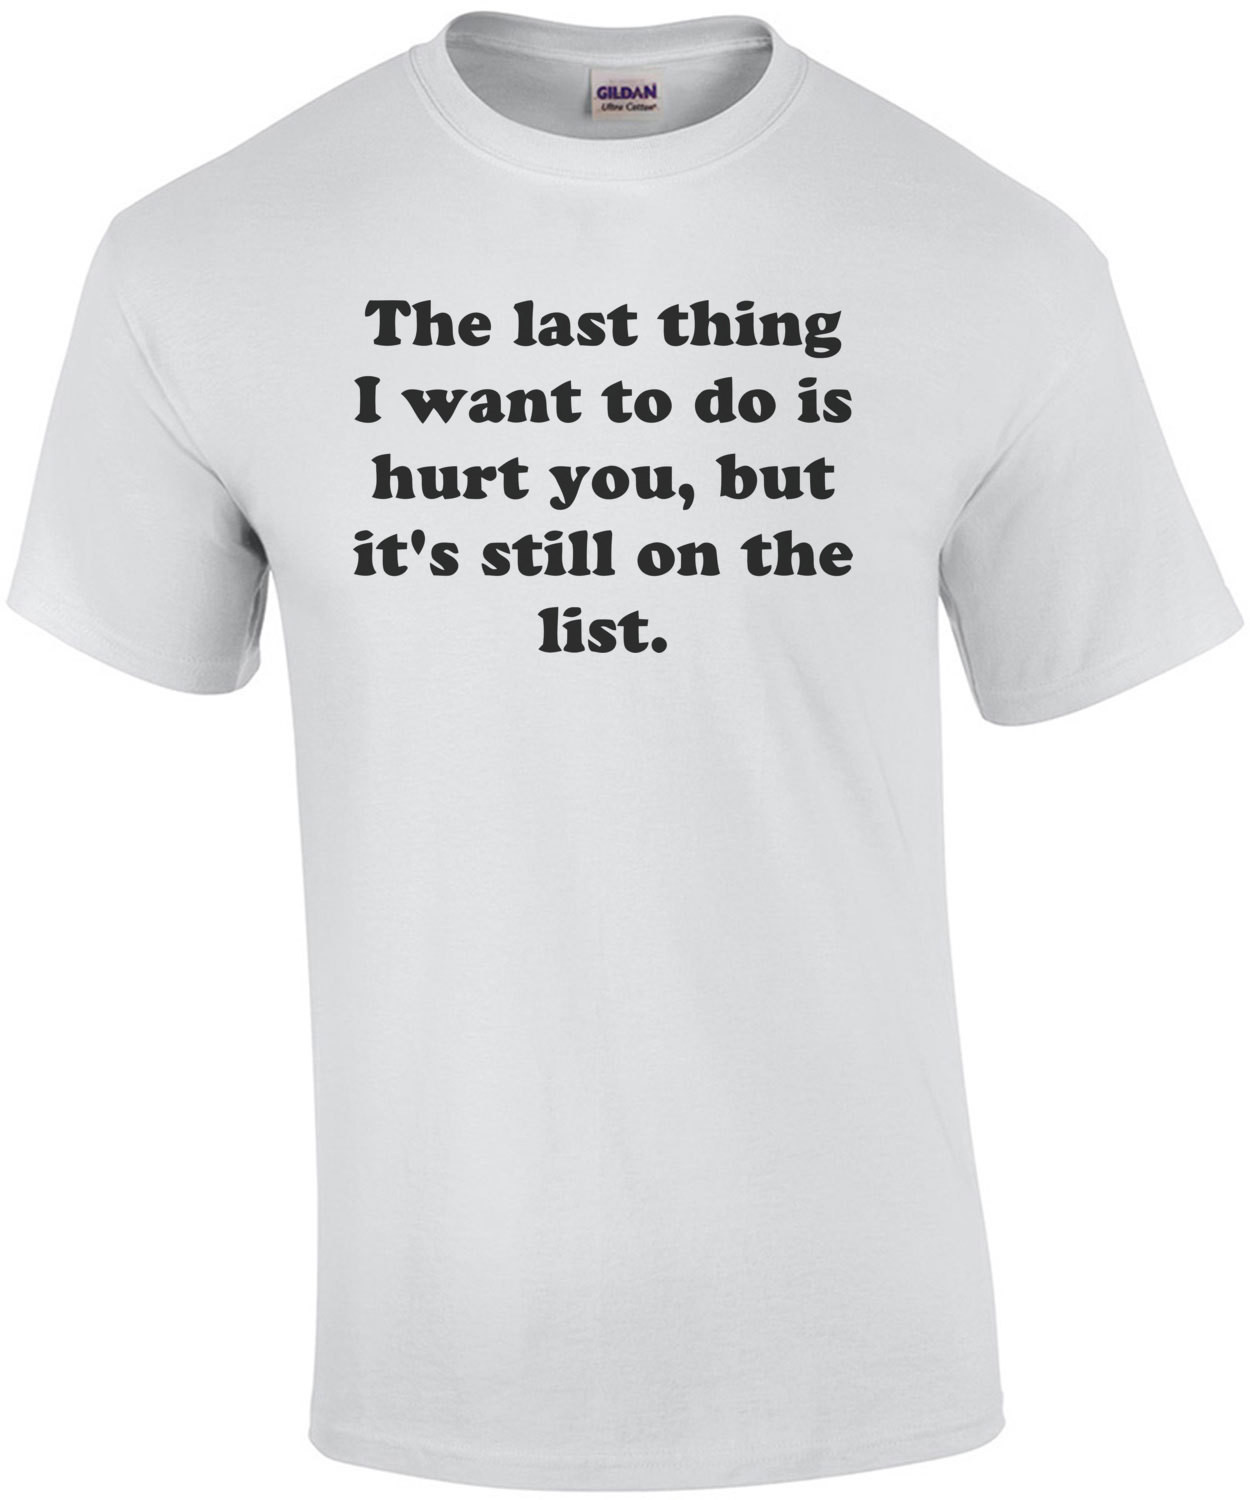 The last thing I want to do is hurt you, but it's still on the list. Shirt